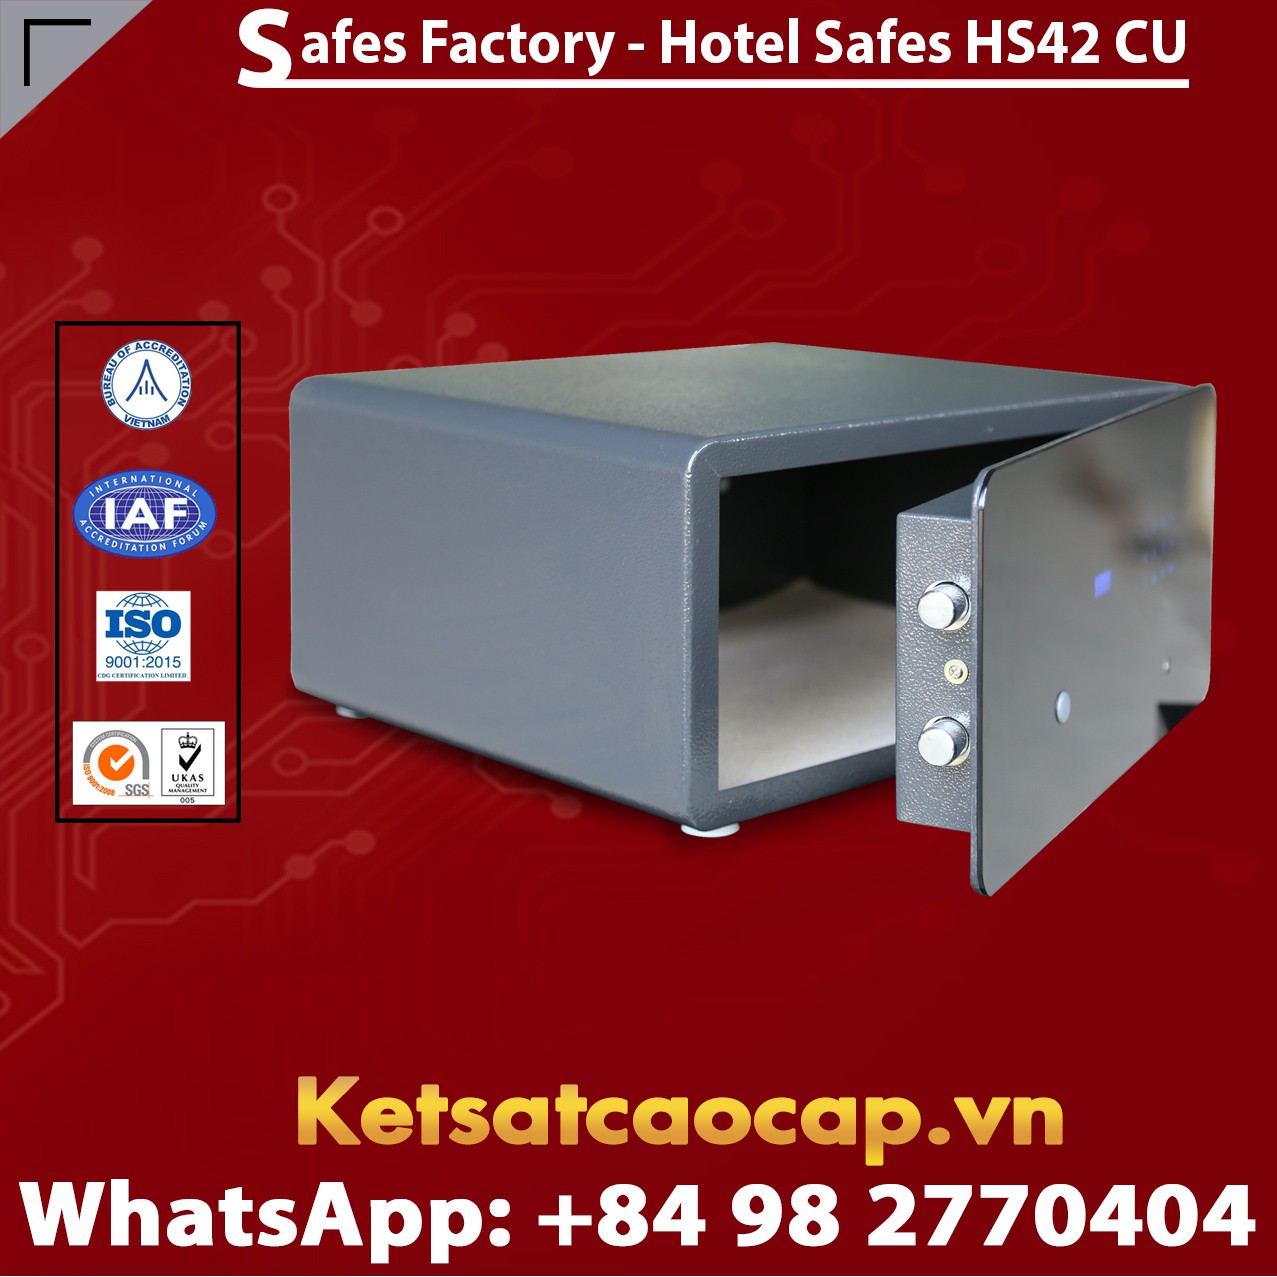 Hotel Safety Deposit Box Suppliers and Exporters HOMESUN